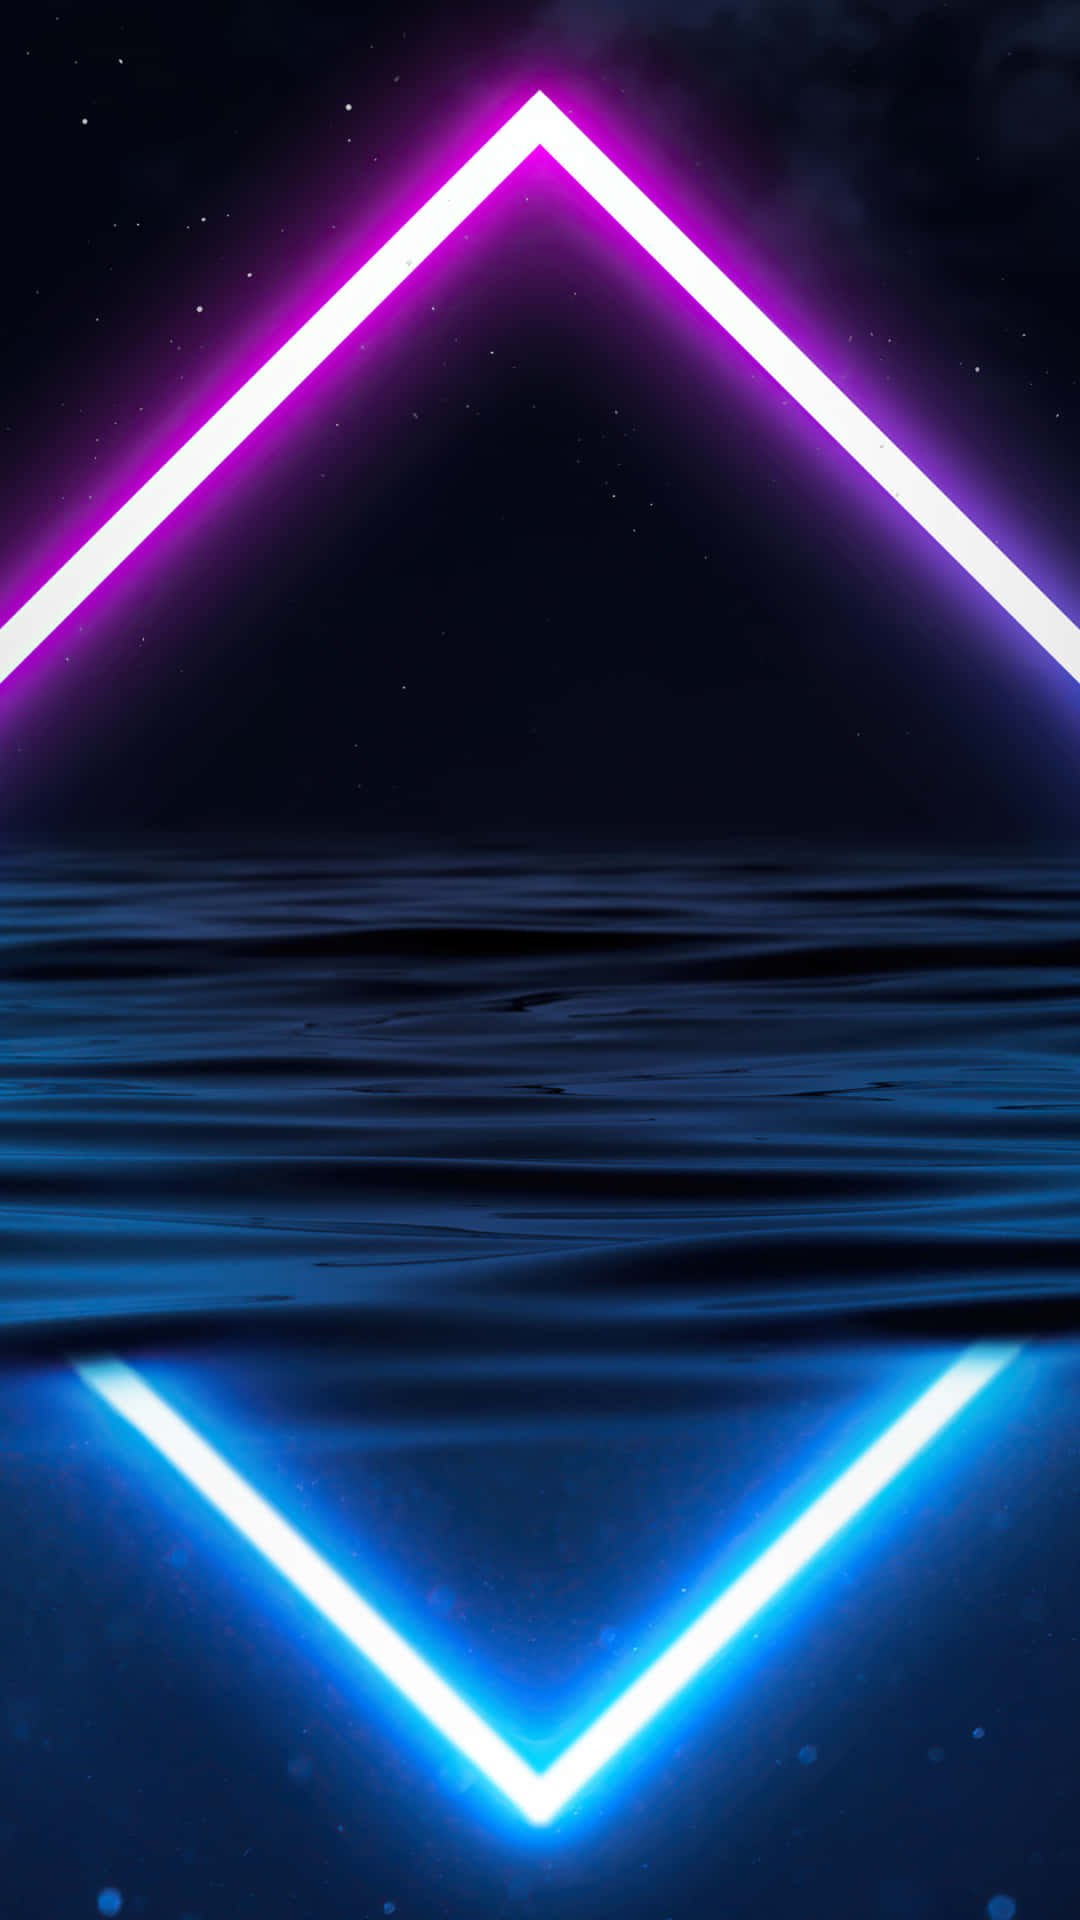 An eye-catching Blue Neon Background